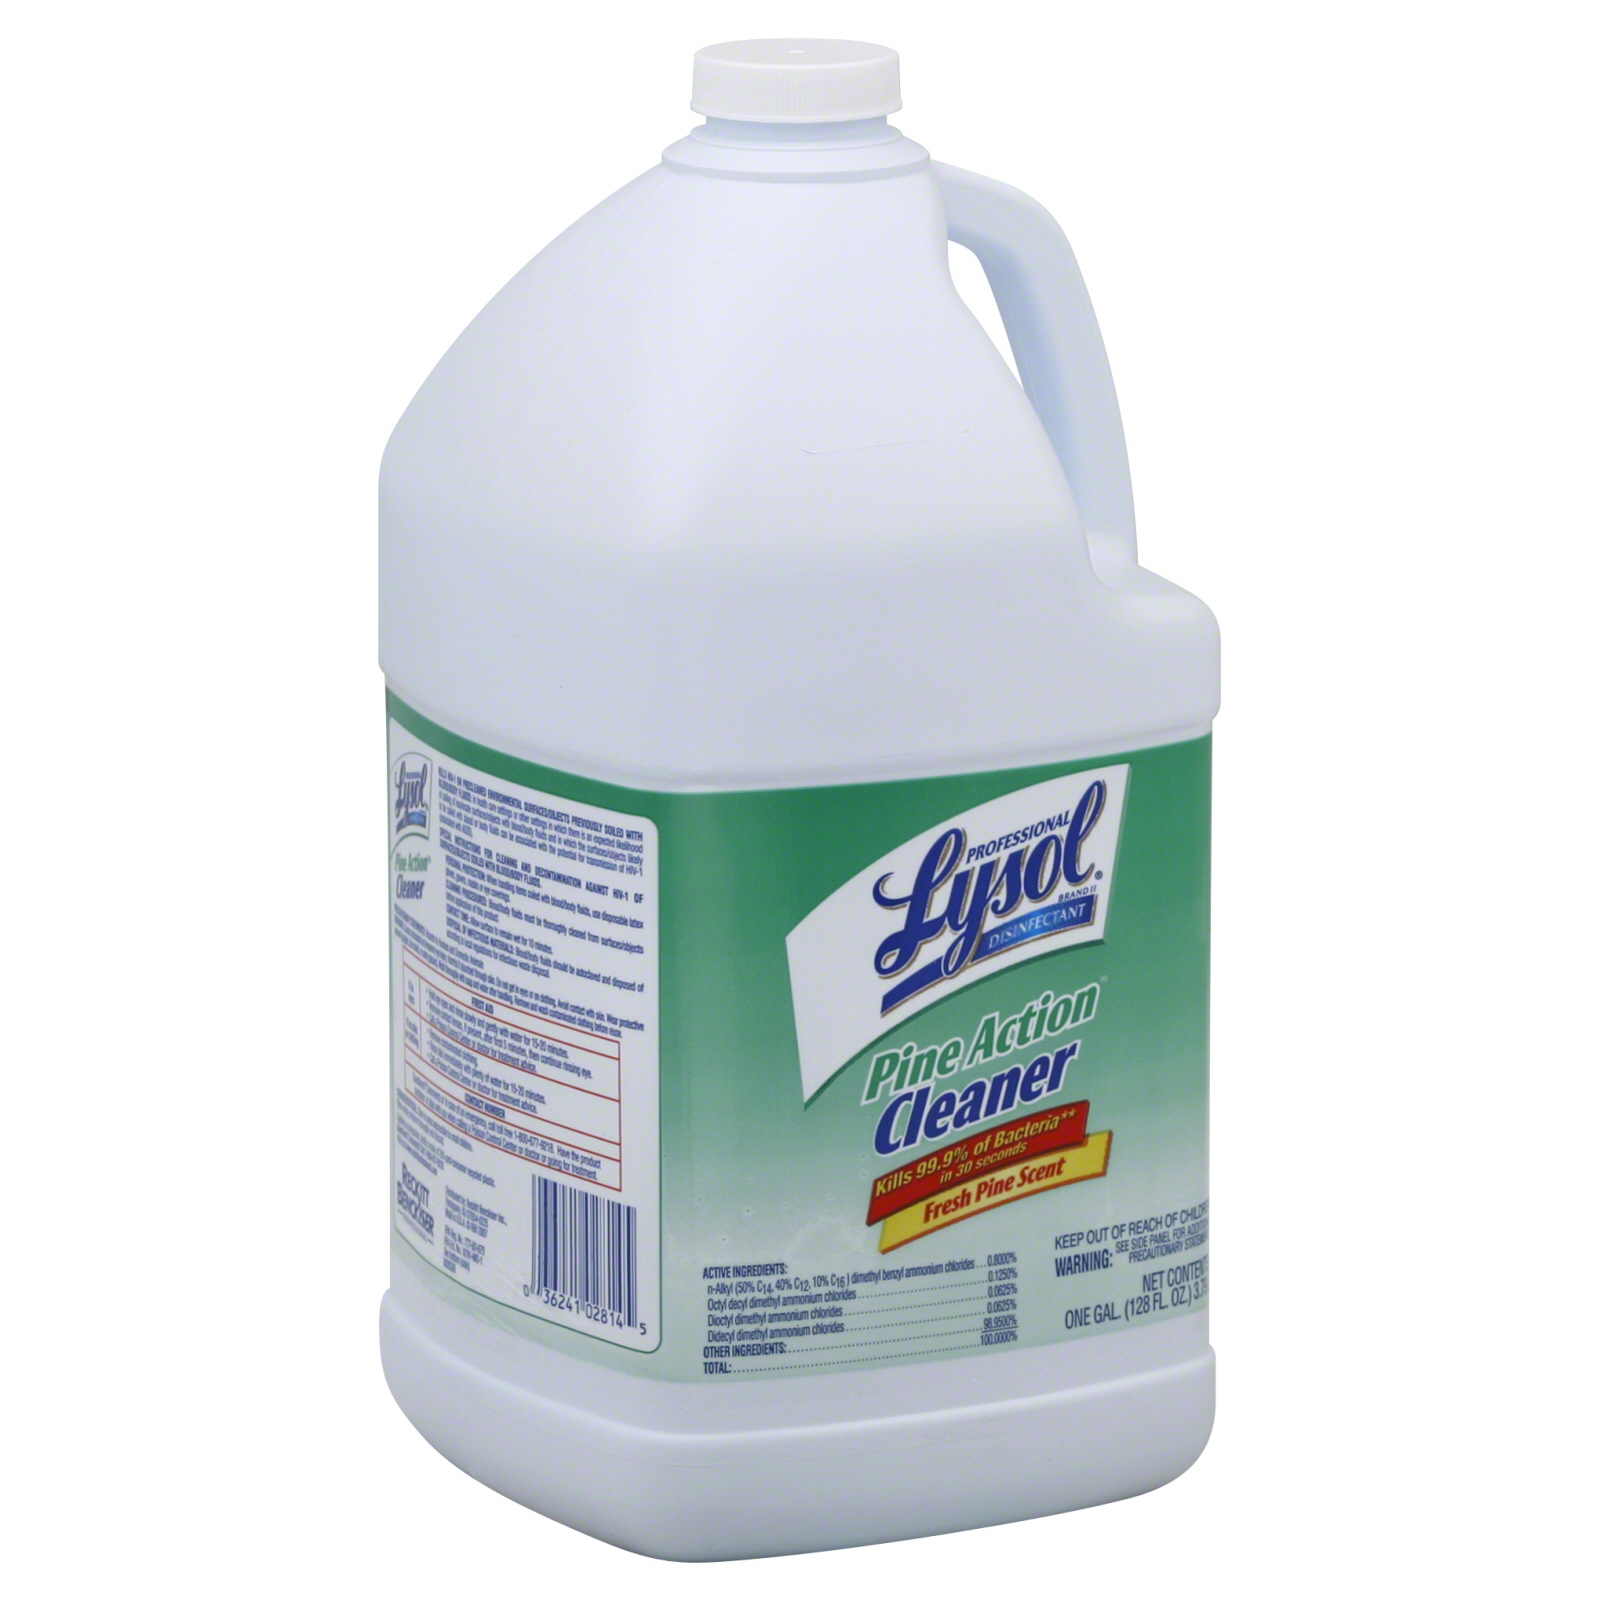 Lysol Disinfectant Pine Action Cleaner, 1gal Bottle